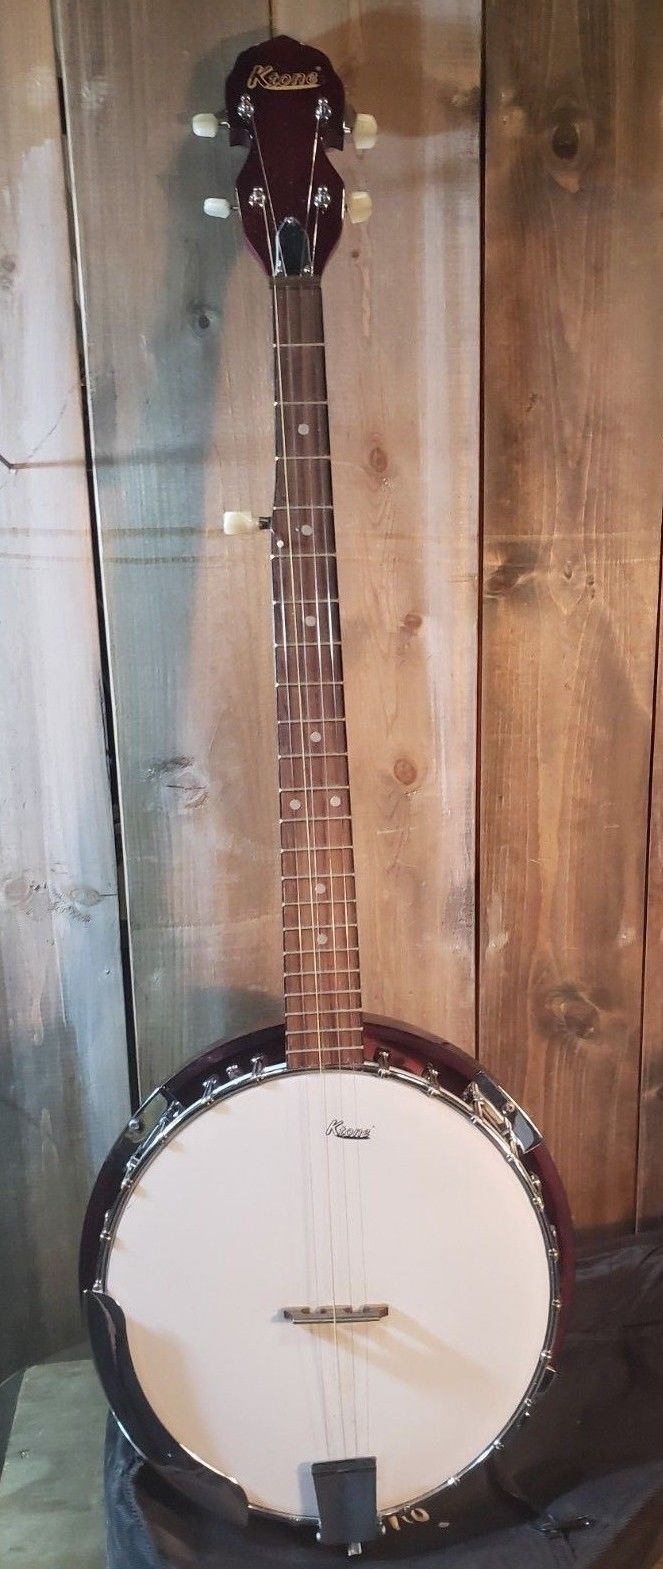 KTONE 5 string Banjo Resonator Open Back Very good used shape with Soft Case